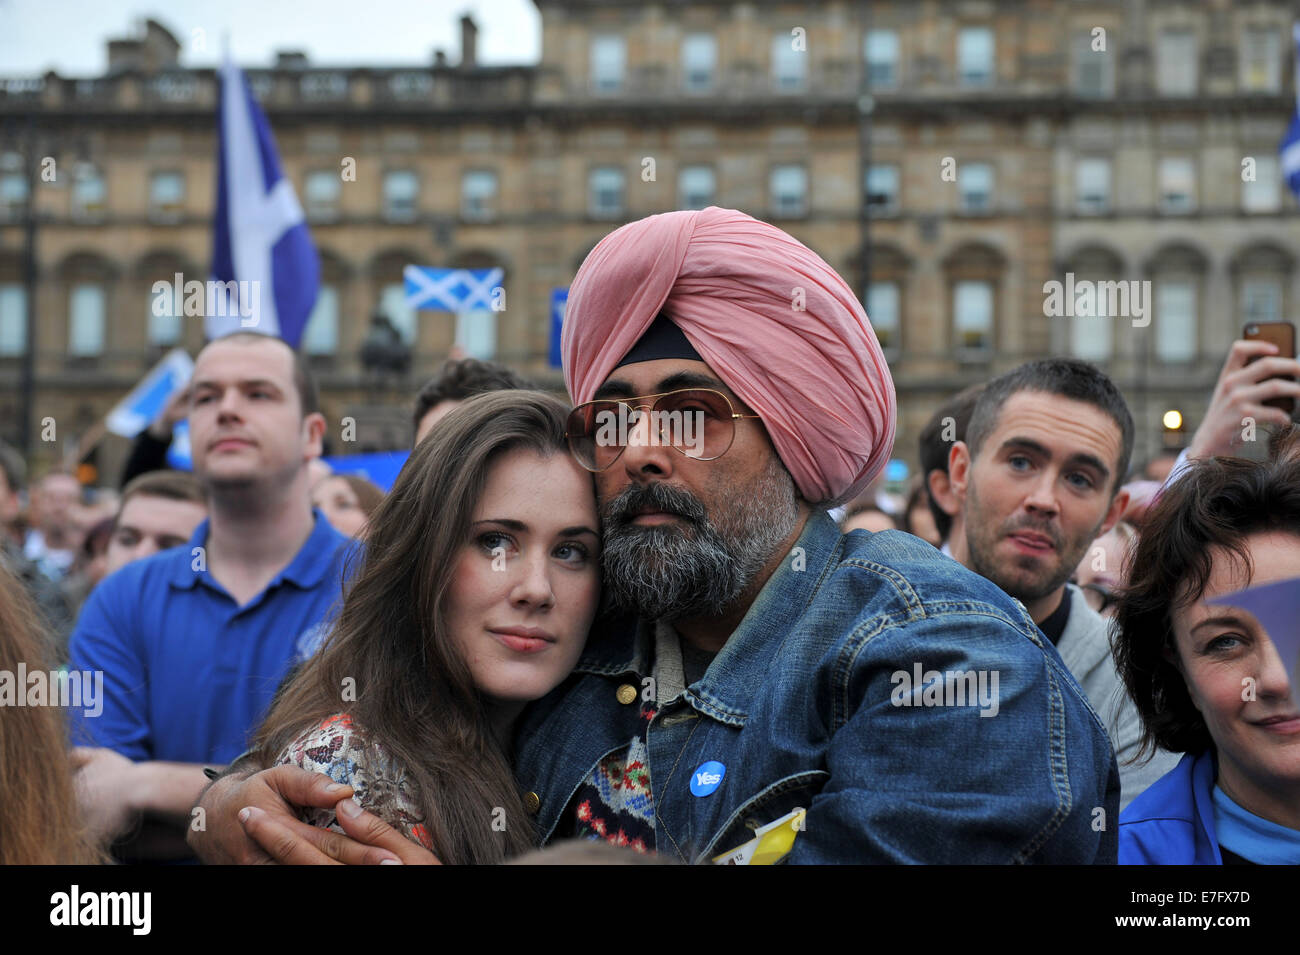 Glasgow, Scotland, UK. 16th September, 2014. Scottish pro-independence rally. Broadcaster and writer Hardeep Singh Kohli amongst Yes crowd at Scottish independence rally in George Square, Glasgow. Credit:  Tony Clerkson/Alamy Live News Stock Photo